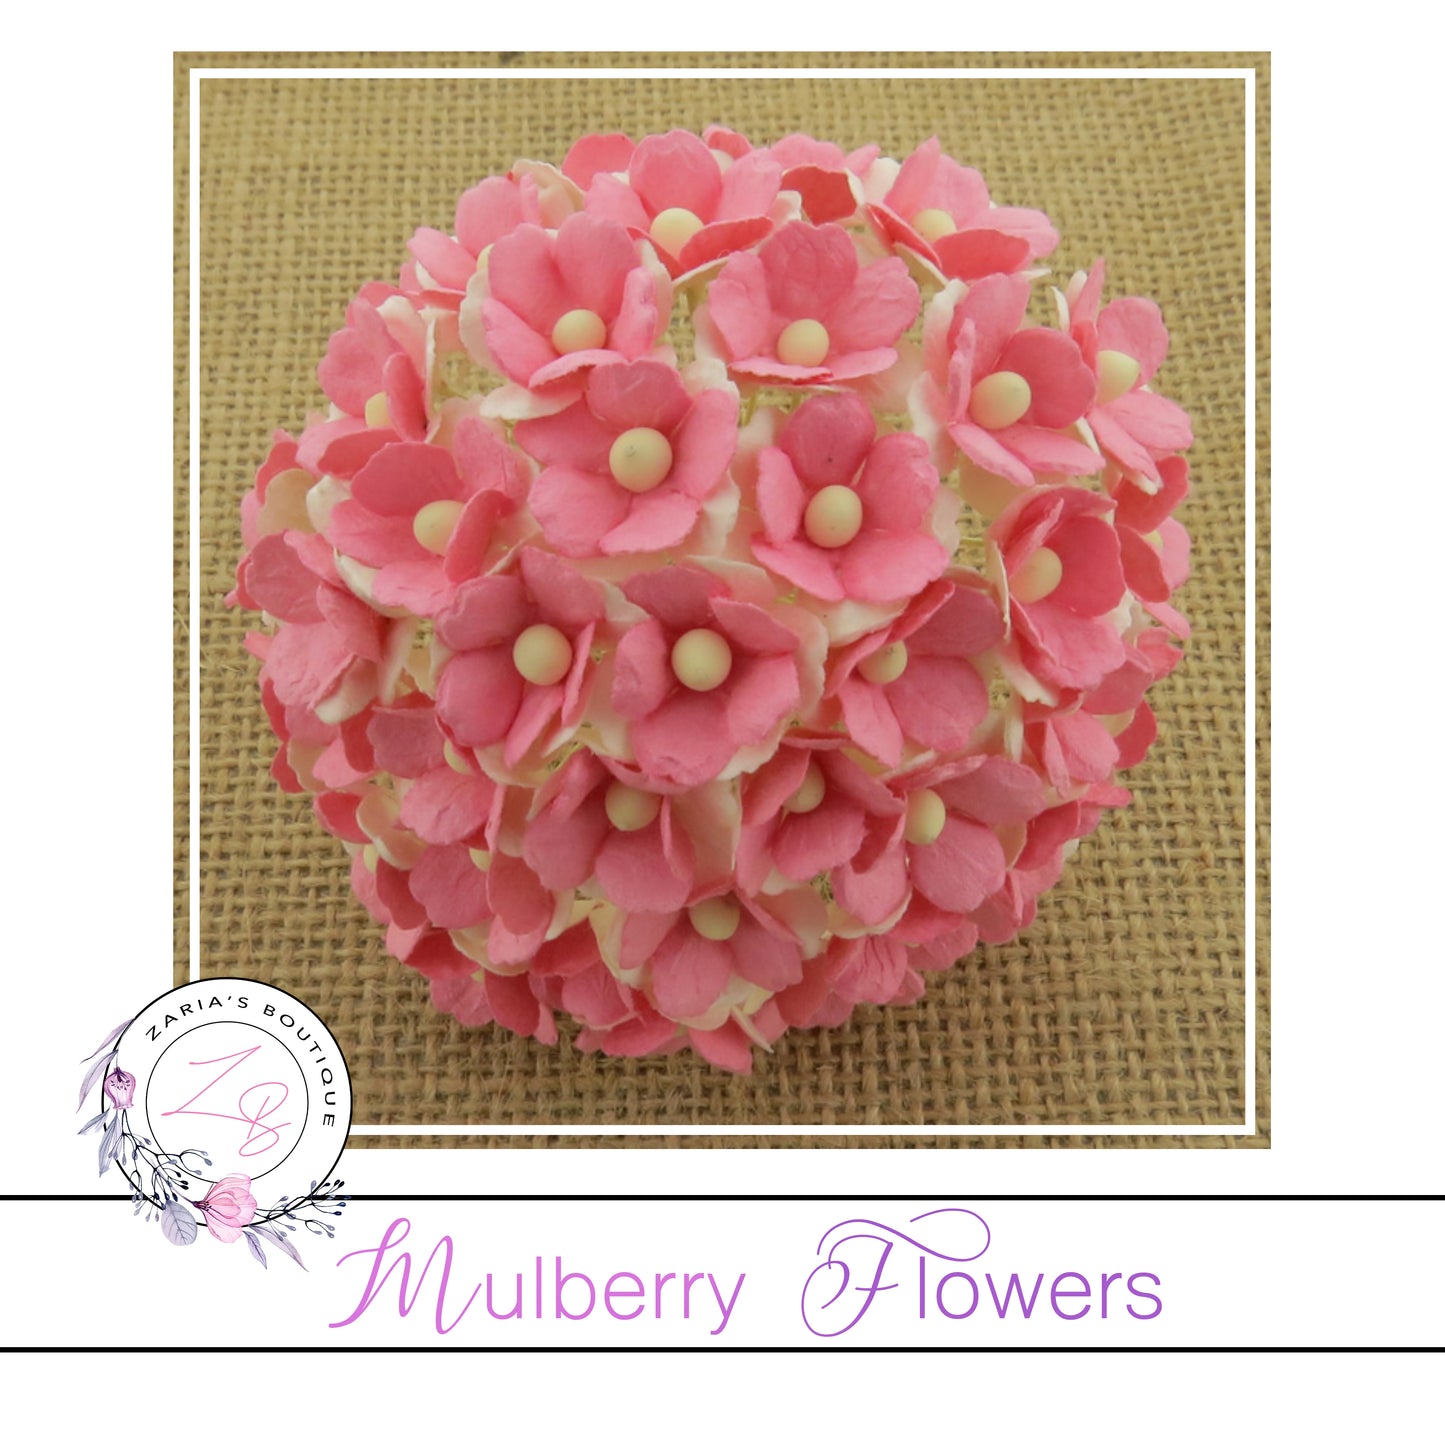 Mulberry Flowers ~ Sweetheart Blossom ~ Two-Tone Pink~ 15mm